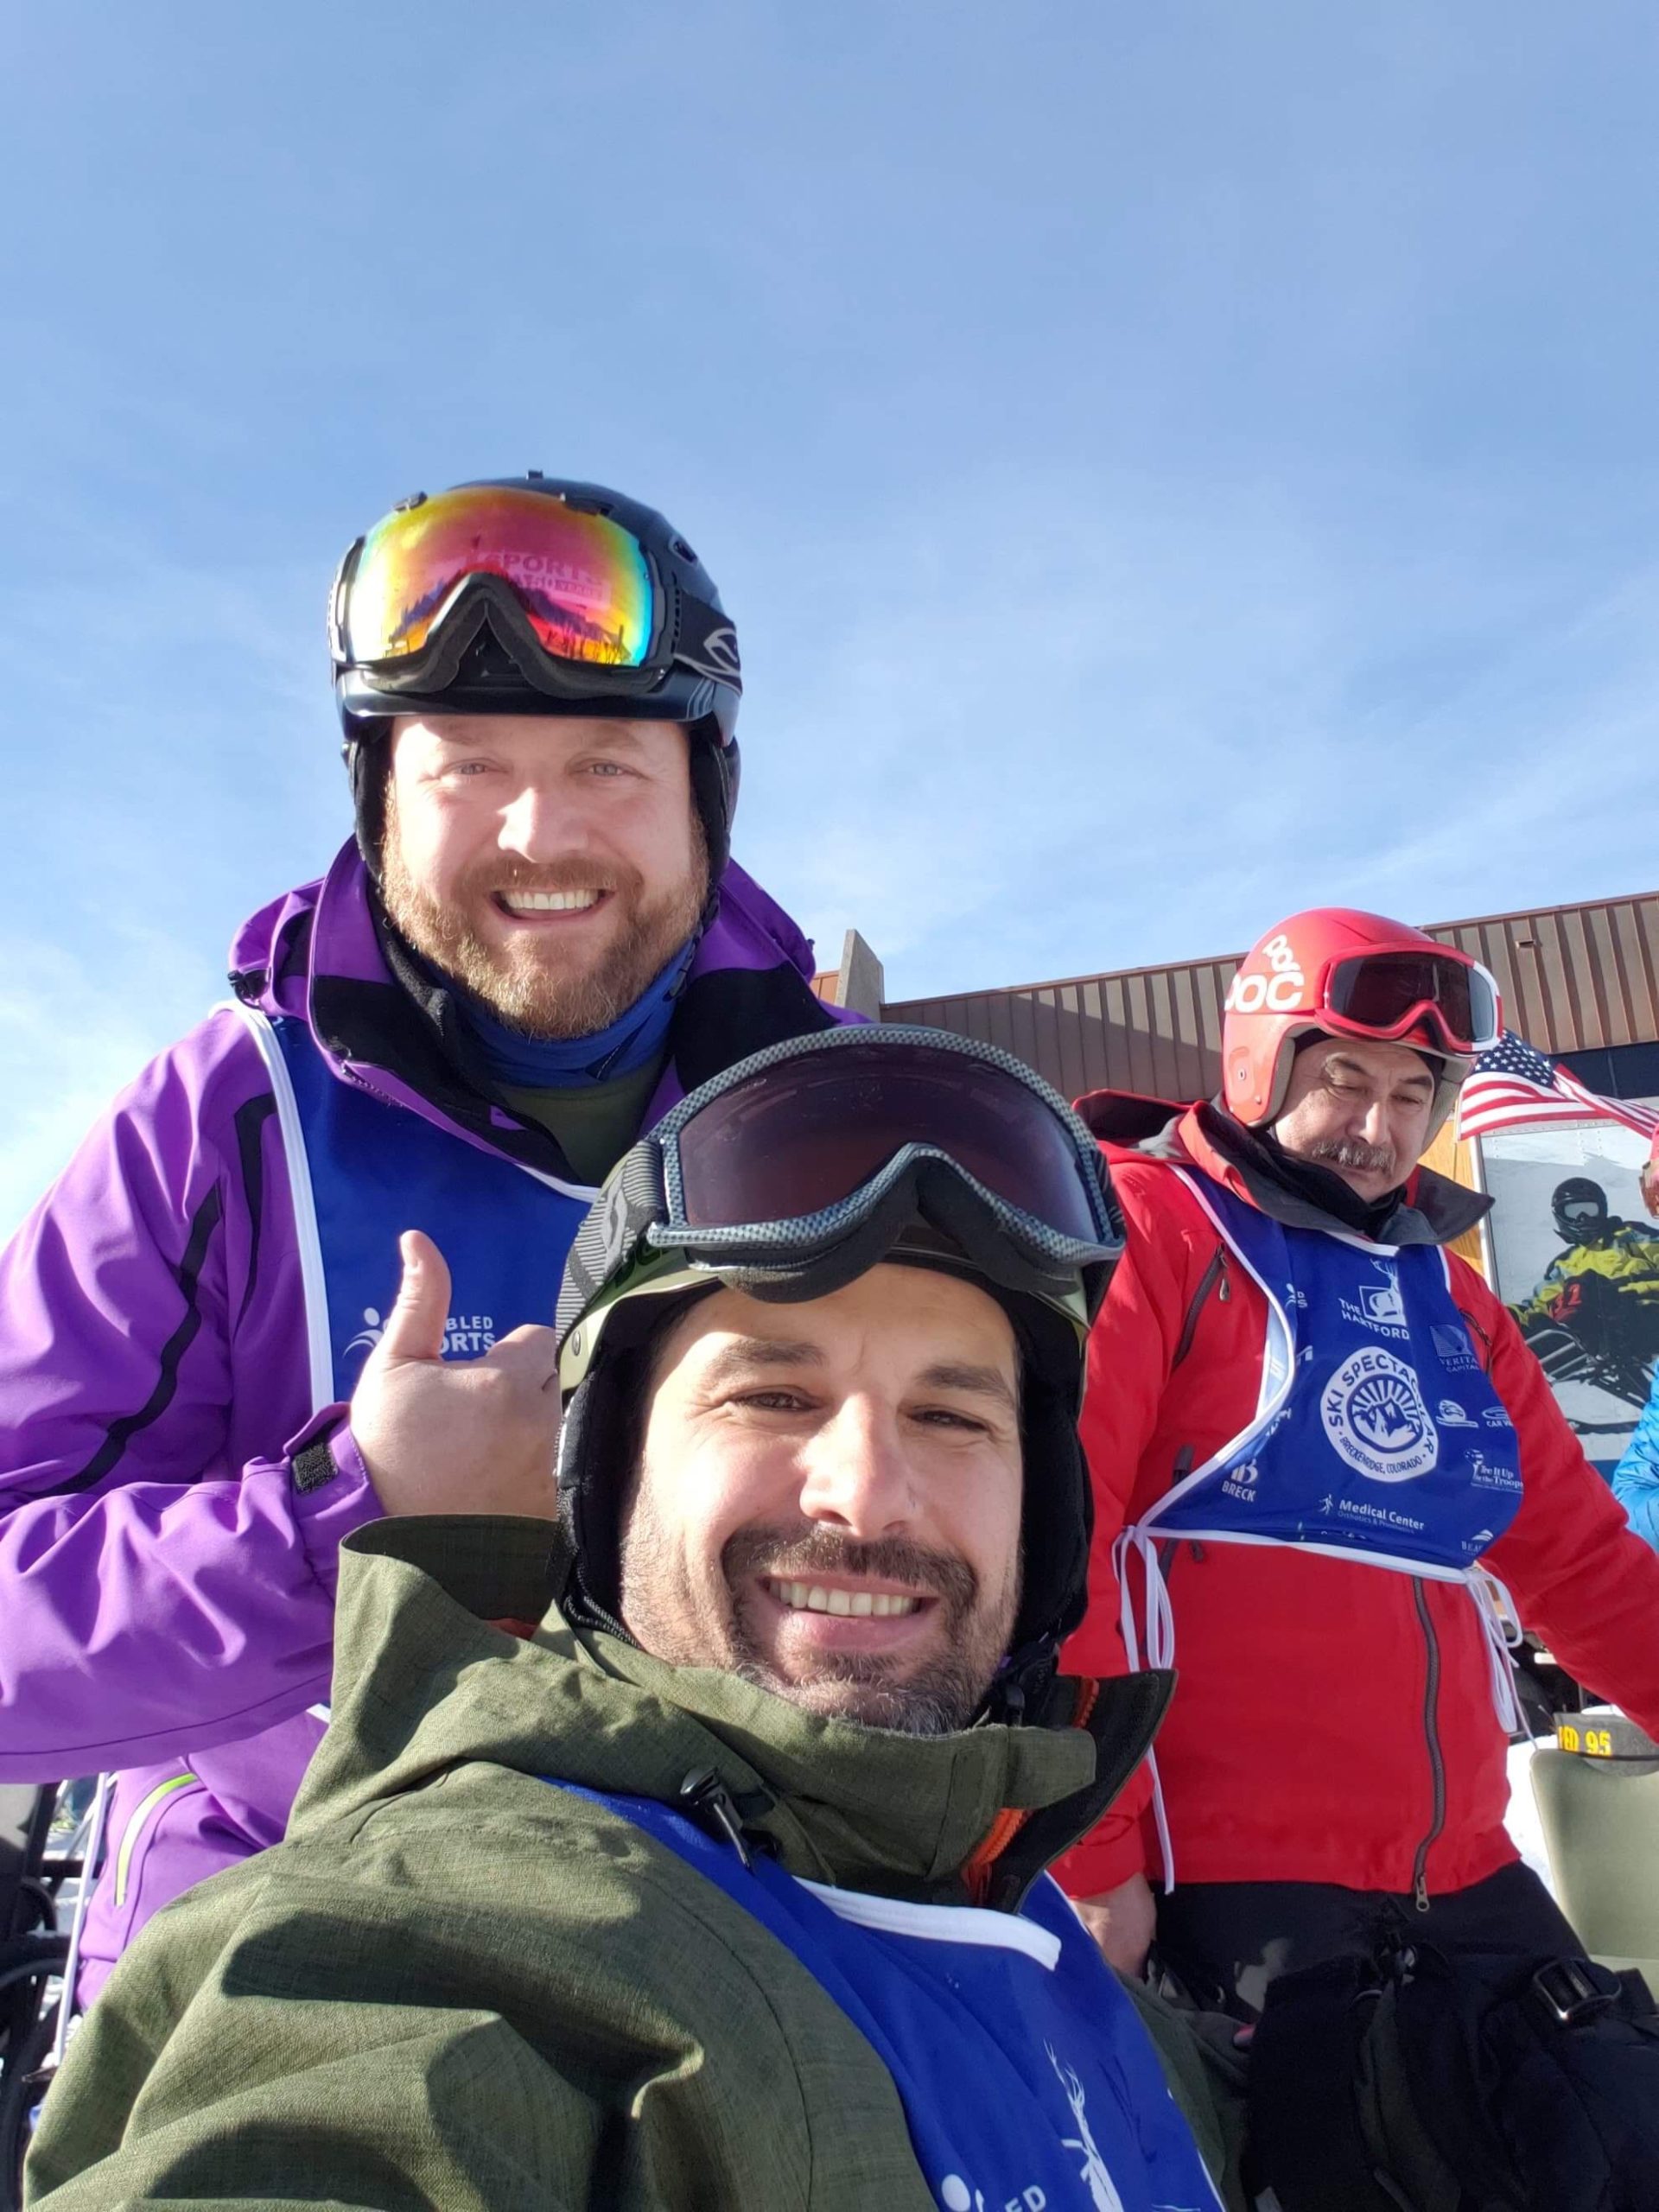 Three male skiers posed smiling at the camera and giving a thumbs up